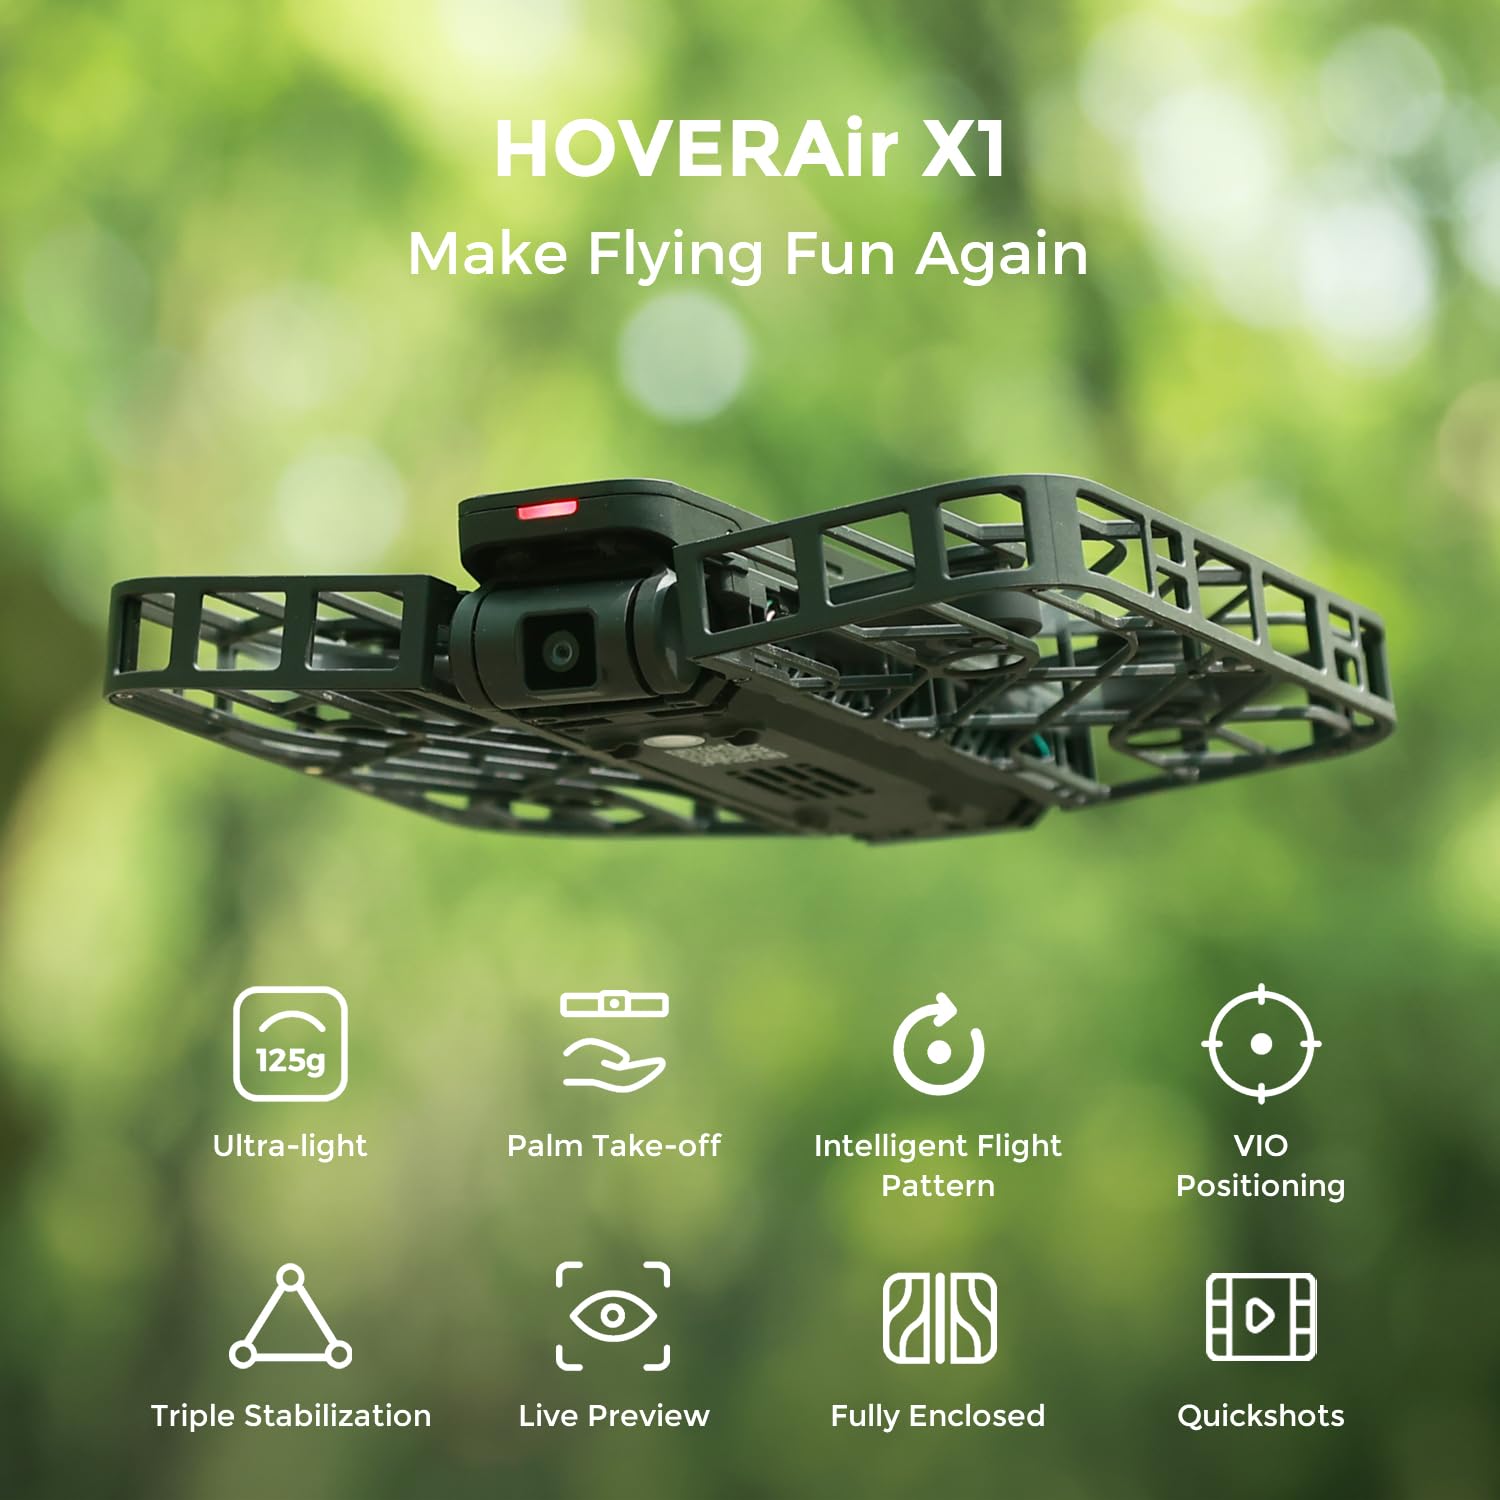 HOVERAir X1 Self-Flying Camera, Pocket-Sized Drone HDR Video Capture, Palm Takeoff, Intelligent Flight Paths, Follow-Me Mode, Foldable Action Camera with Hands-Free Control Black (Standard Combo)